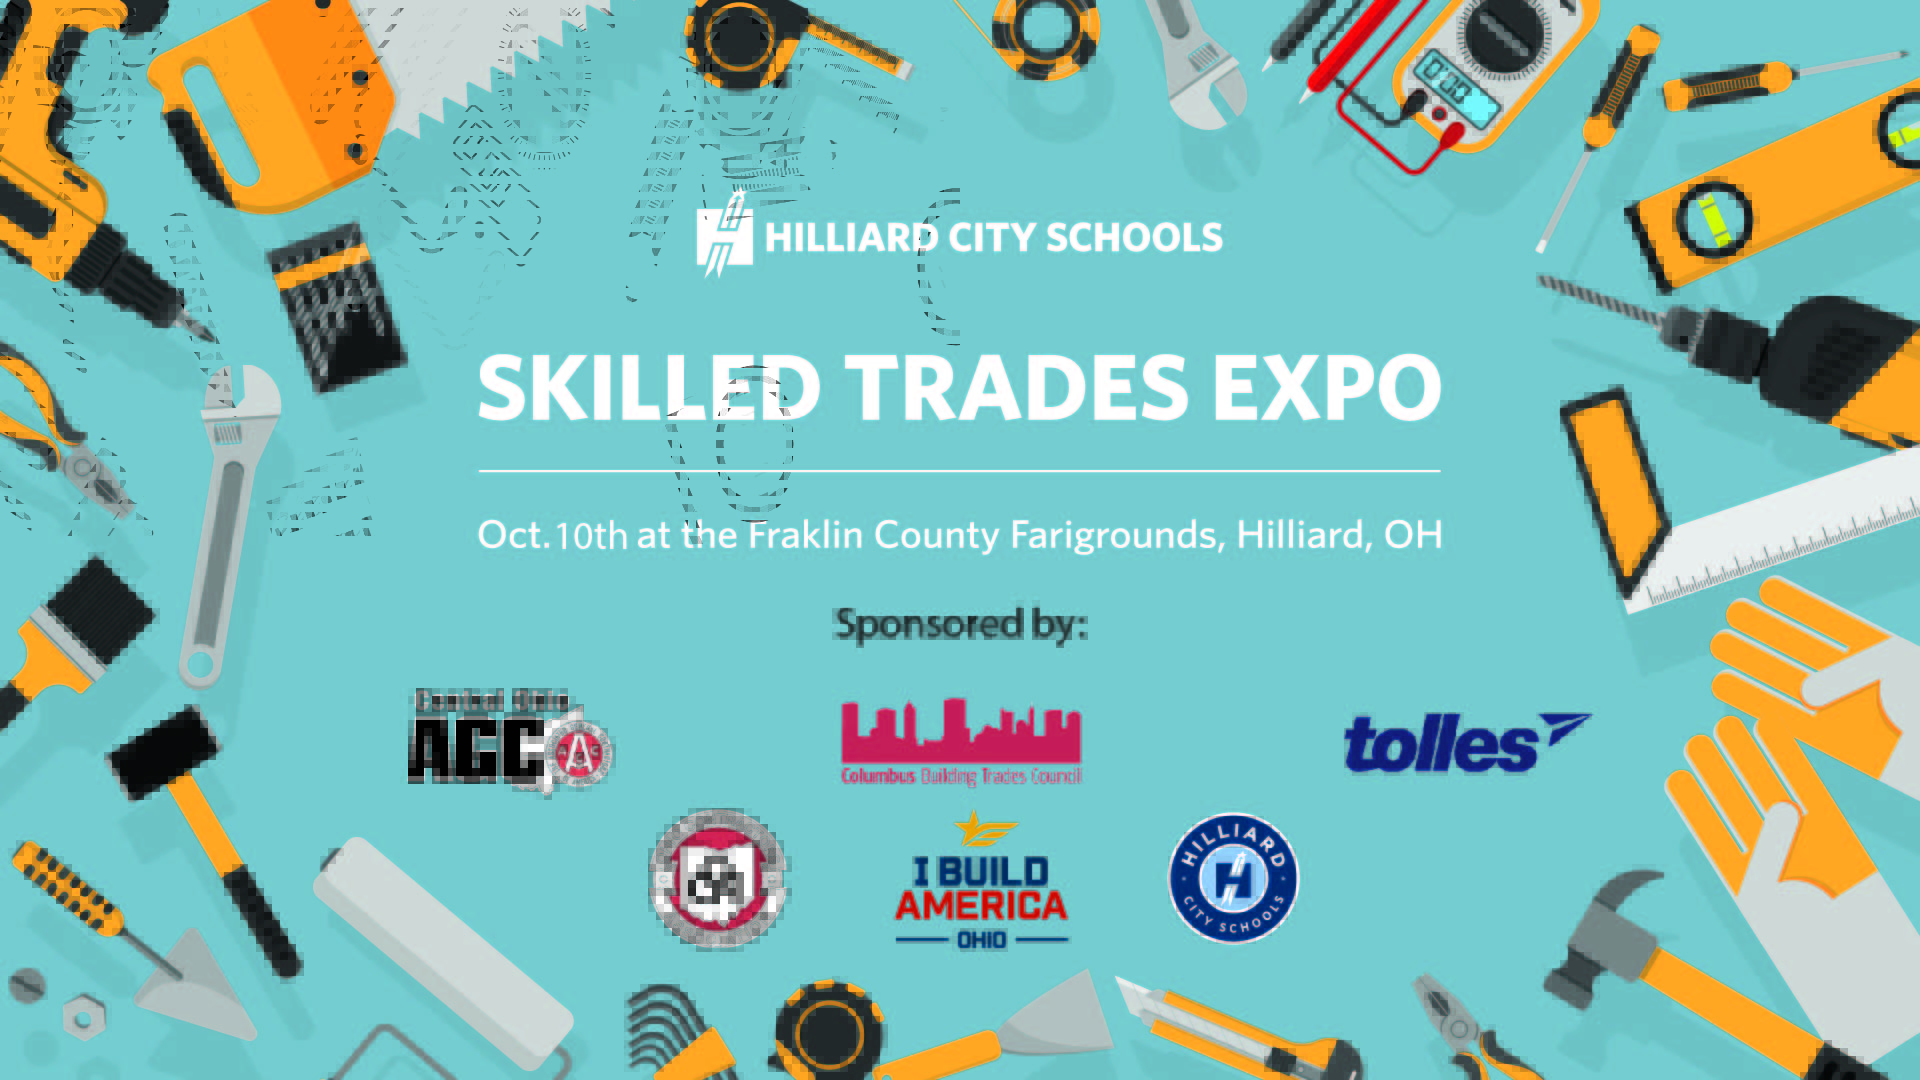 Skilled Trades Expo Oct. 10th